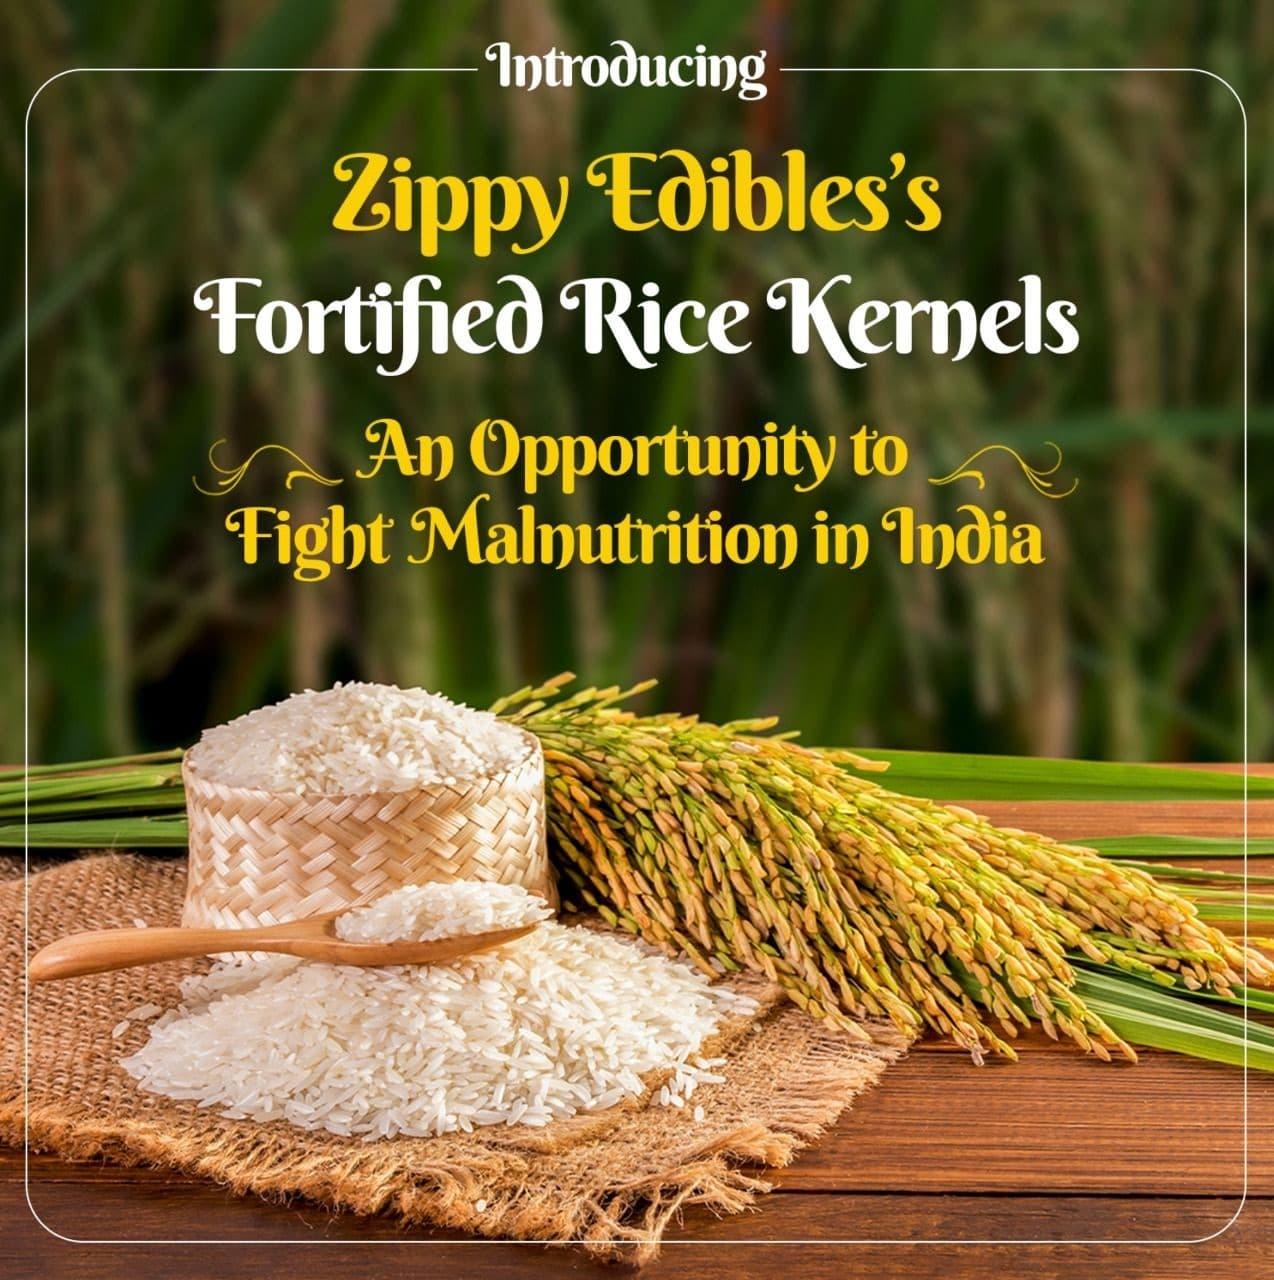 Quality Assured Fortified Rice Kernels (FRK)